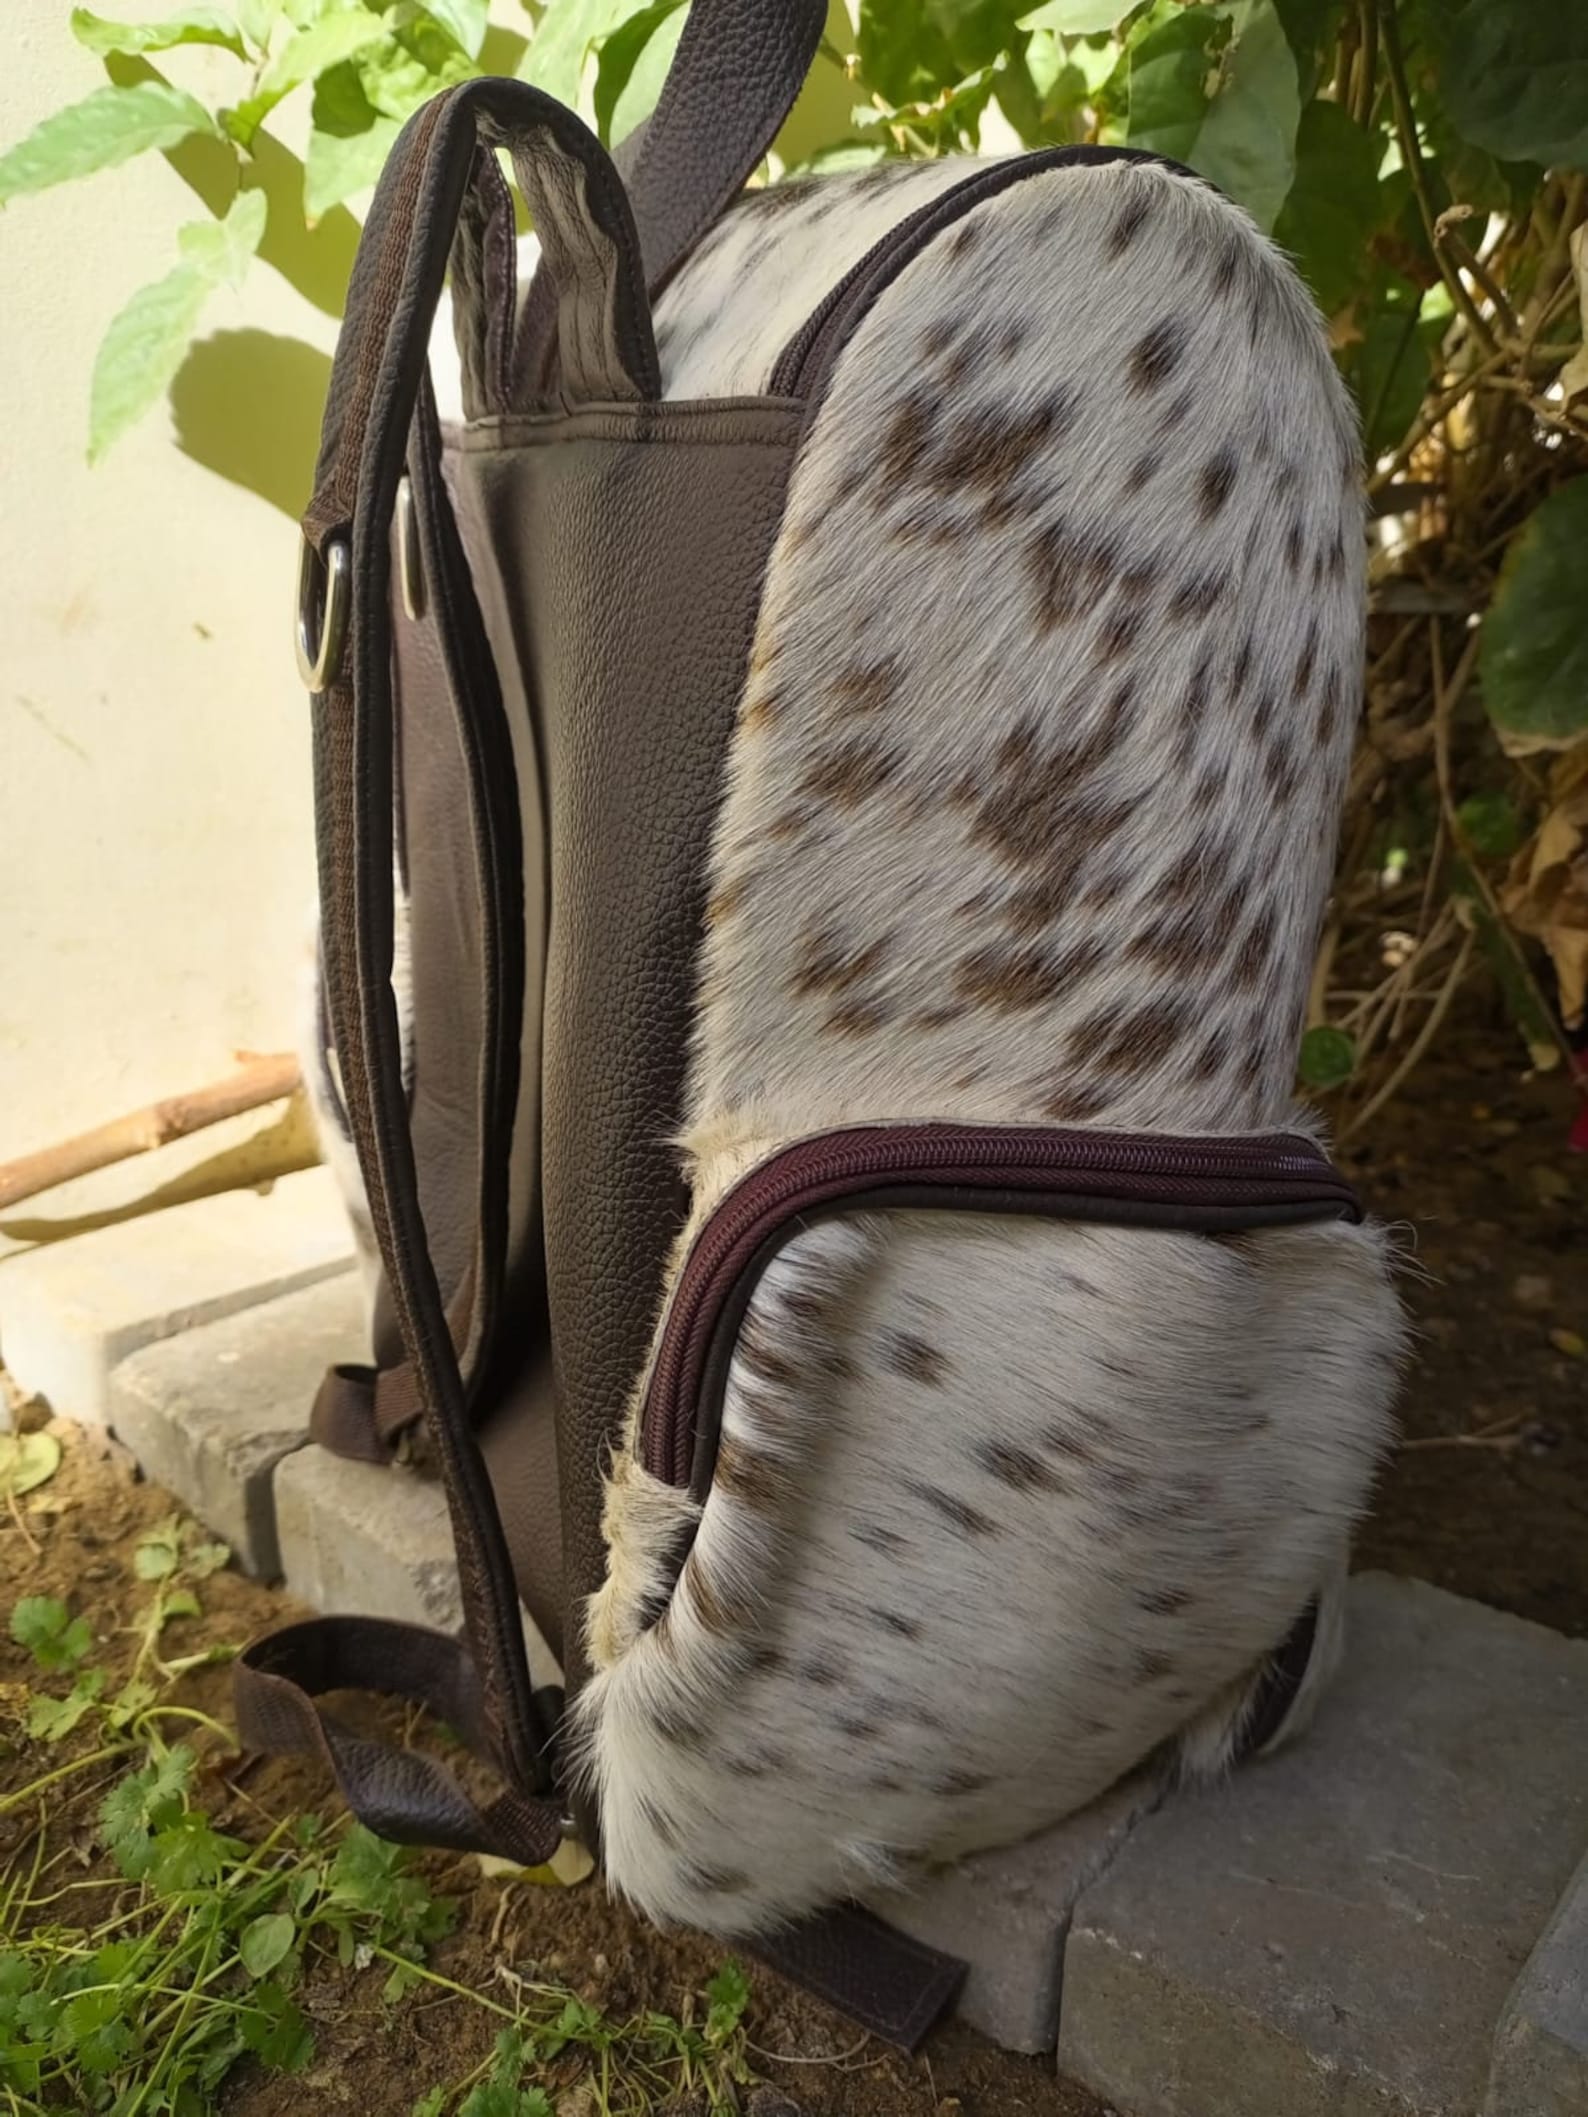 Stylish cowhide backpack with unique patchwork design and soft leather finish.